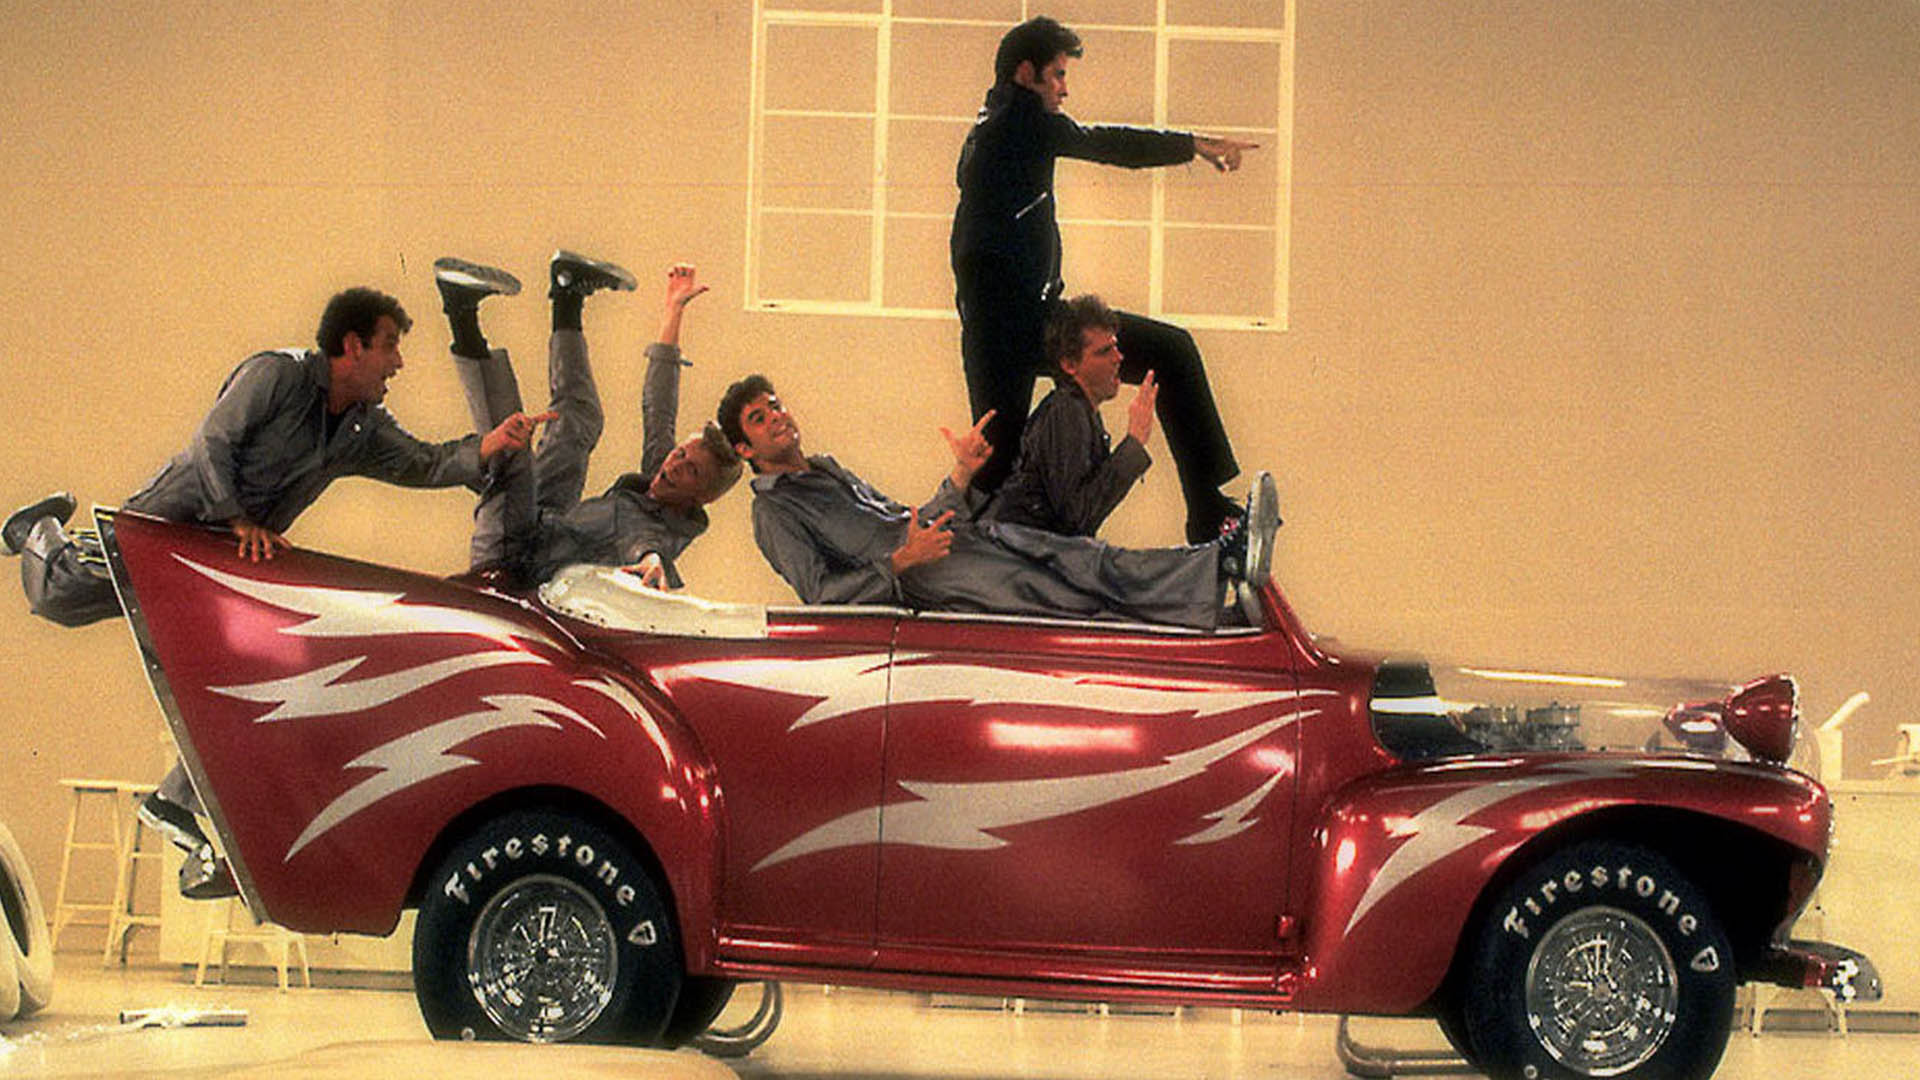 John Travolta and other Grease cast on a car